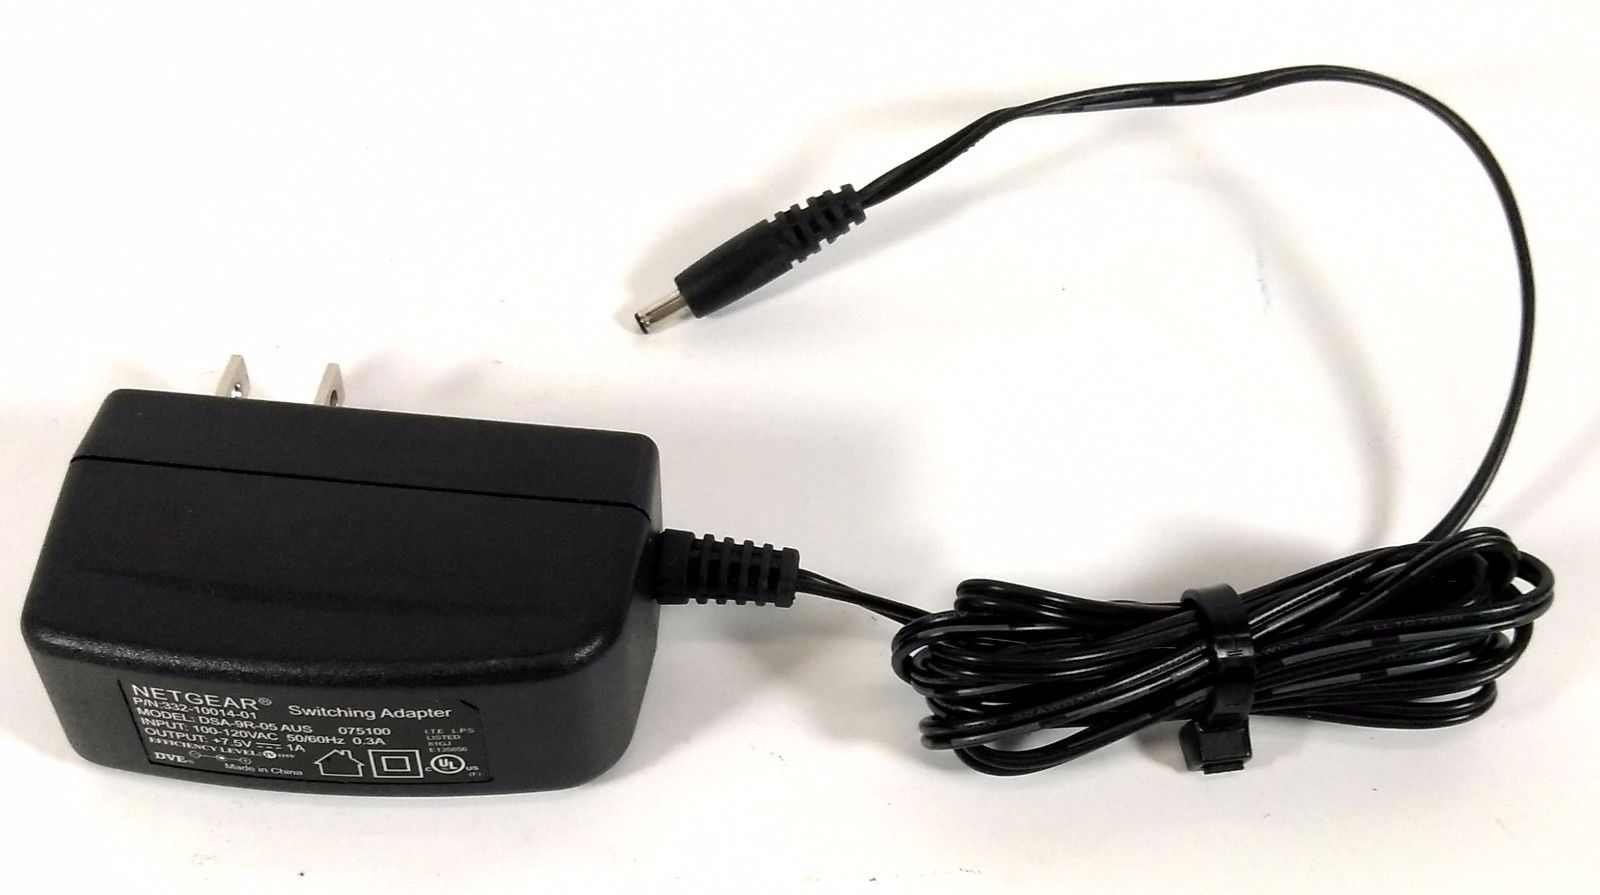 NEW 7.5V 1A Netgear DSA-9R-05 AUS 332-10014-01 AC Power Switching Adapter - Click Image to Close